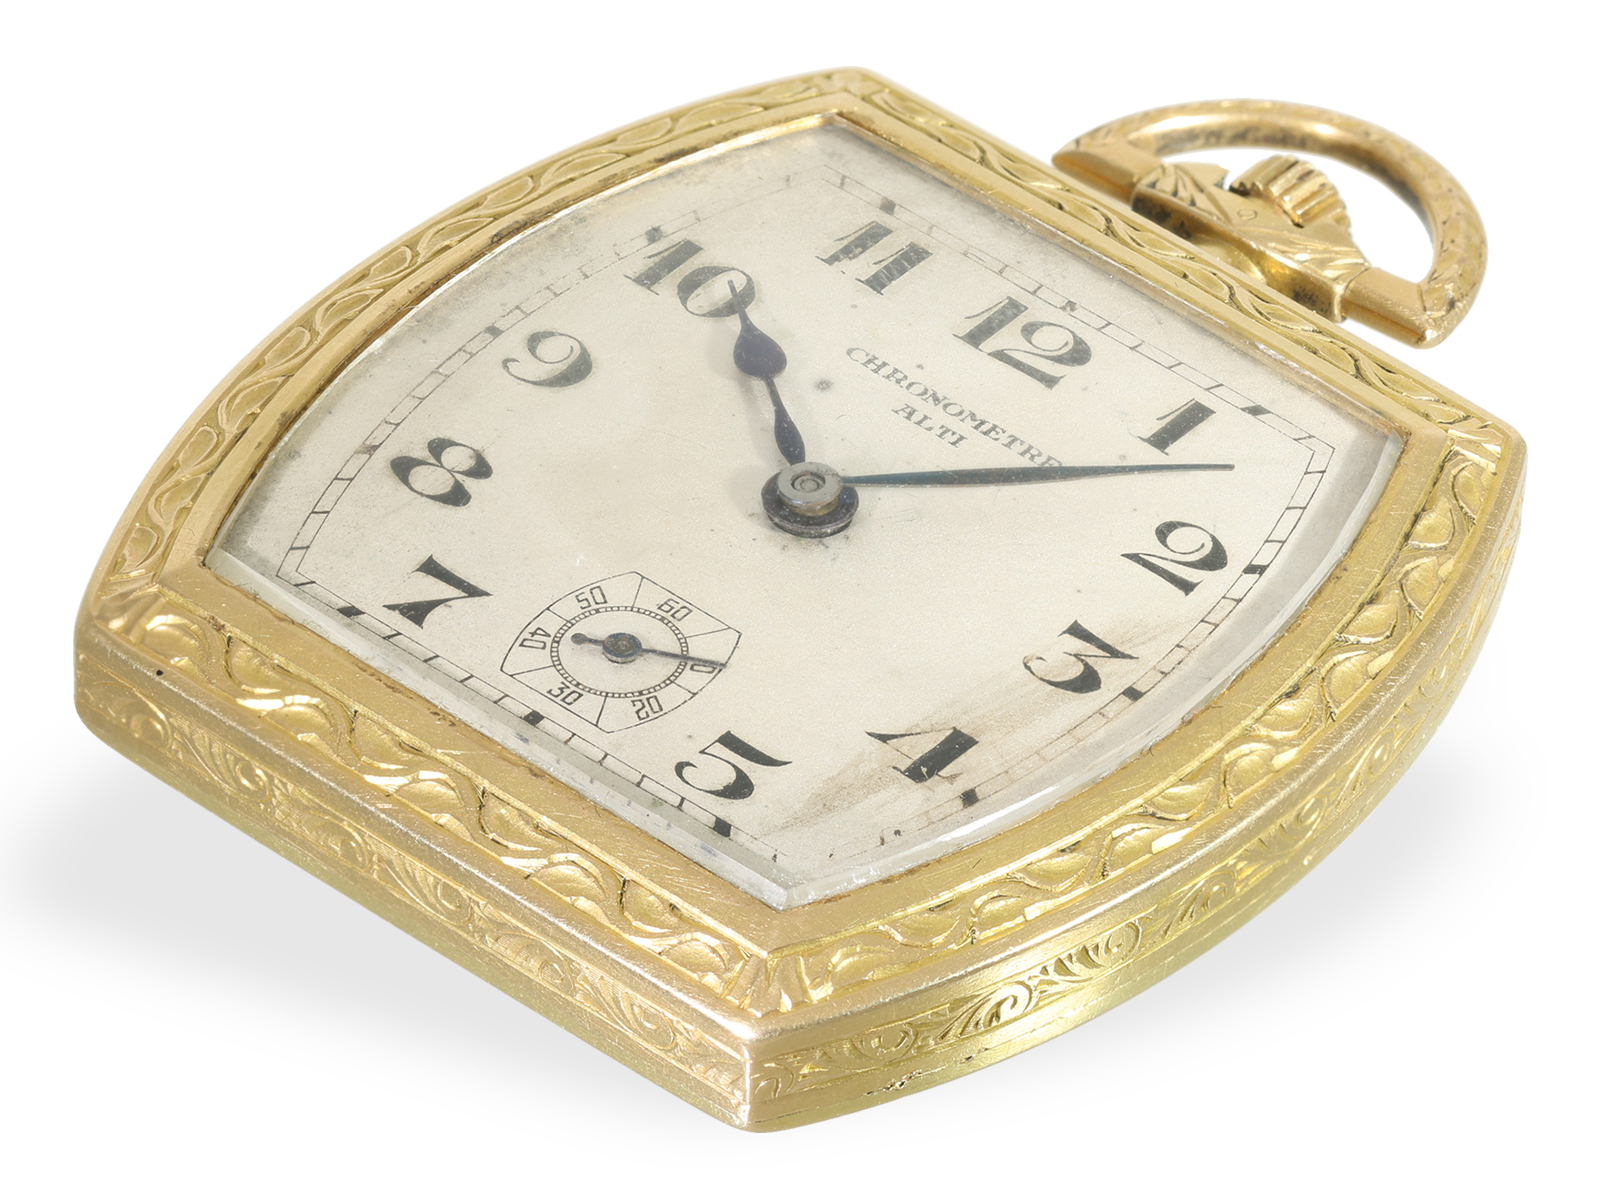 Pocket watch: extremely rare Art Deco gold/enamel dress watch in chronometer quality, ca. 1925 - Image 3 of 6